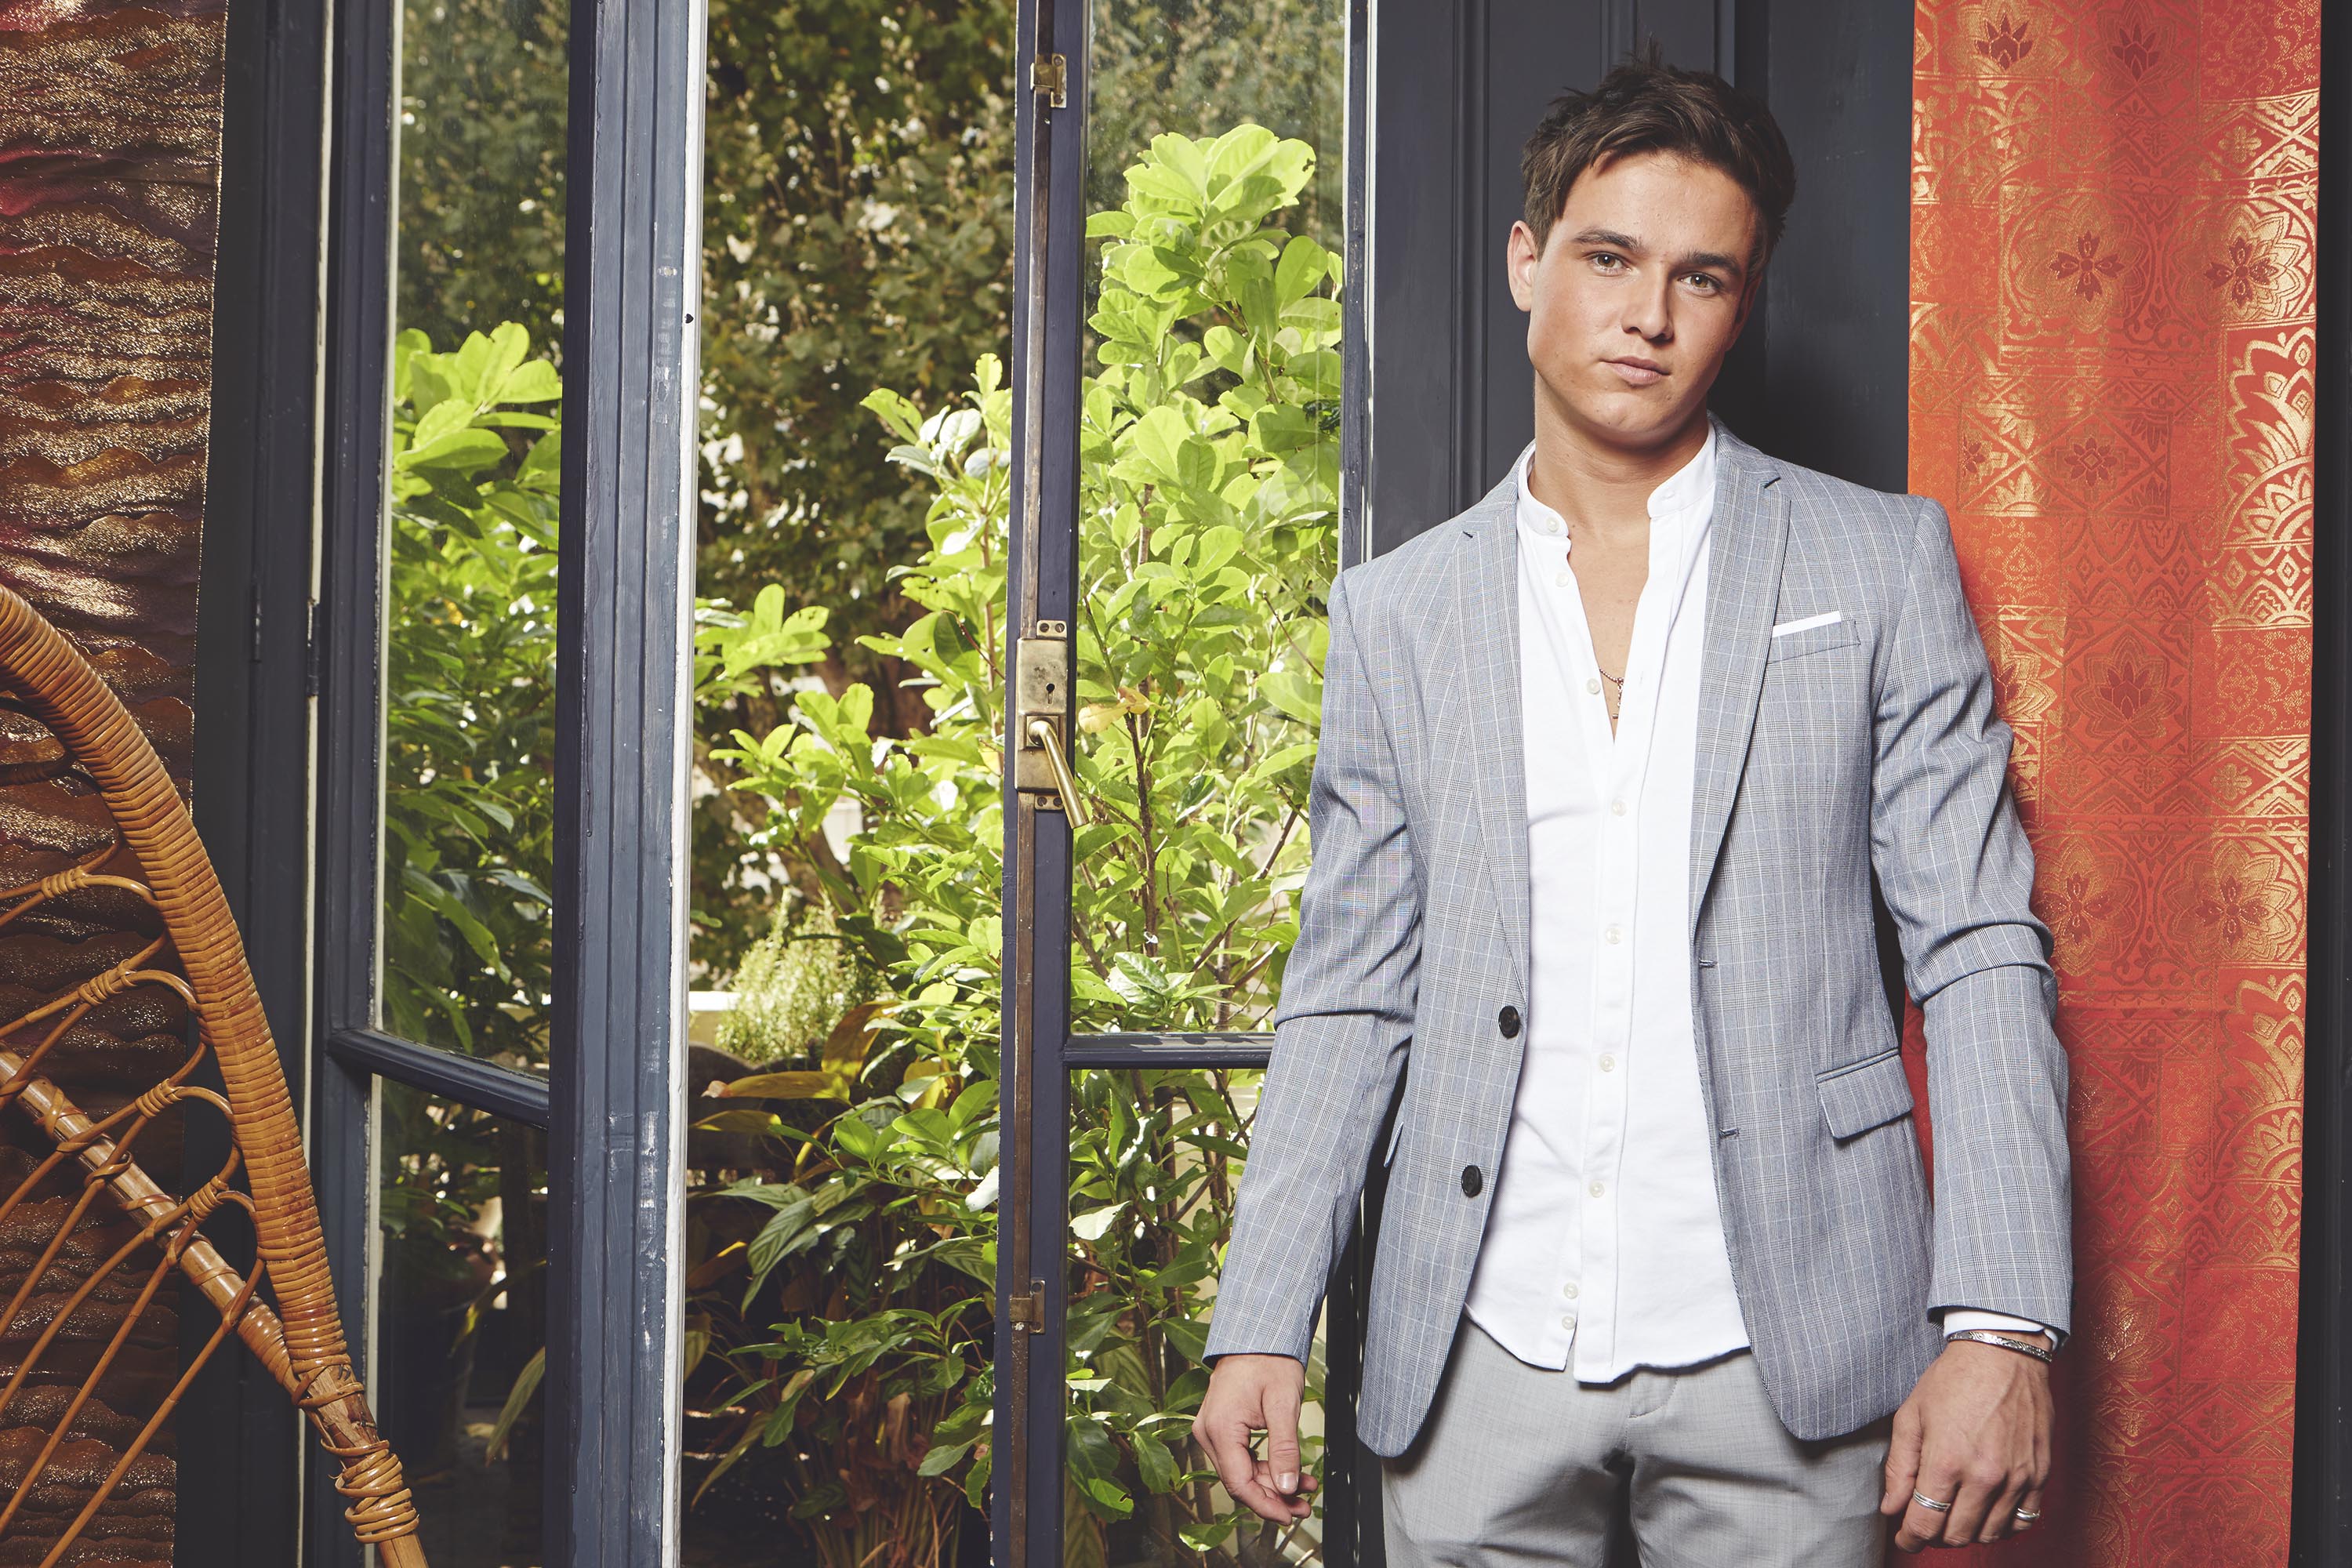 Get to know Made In Chelsea's Sam Prince, his net worth explored